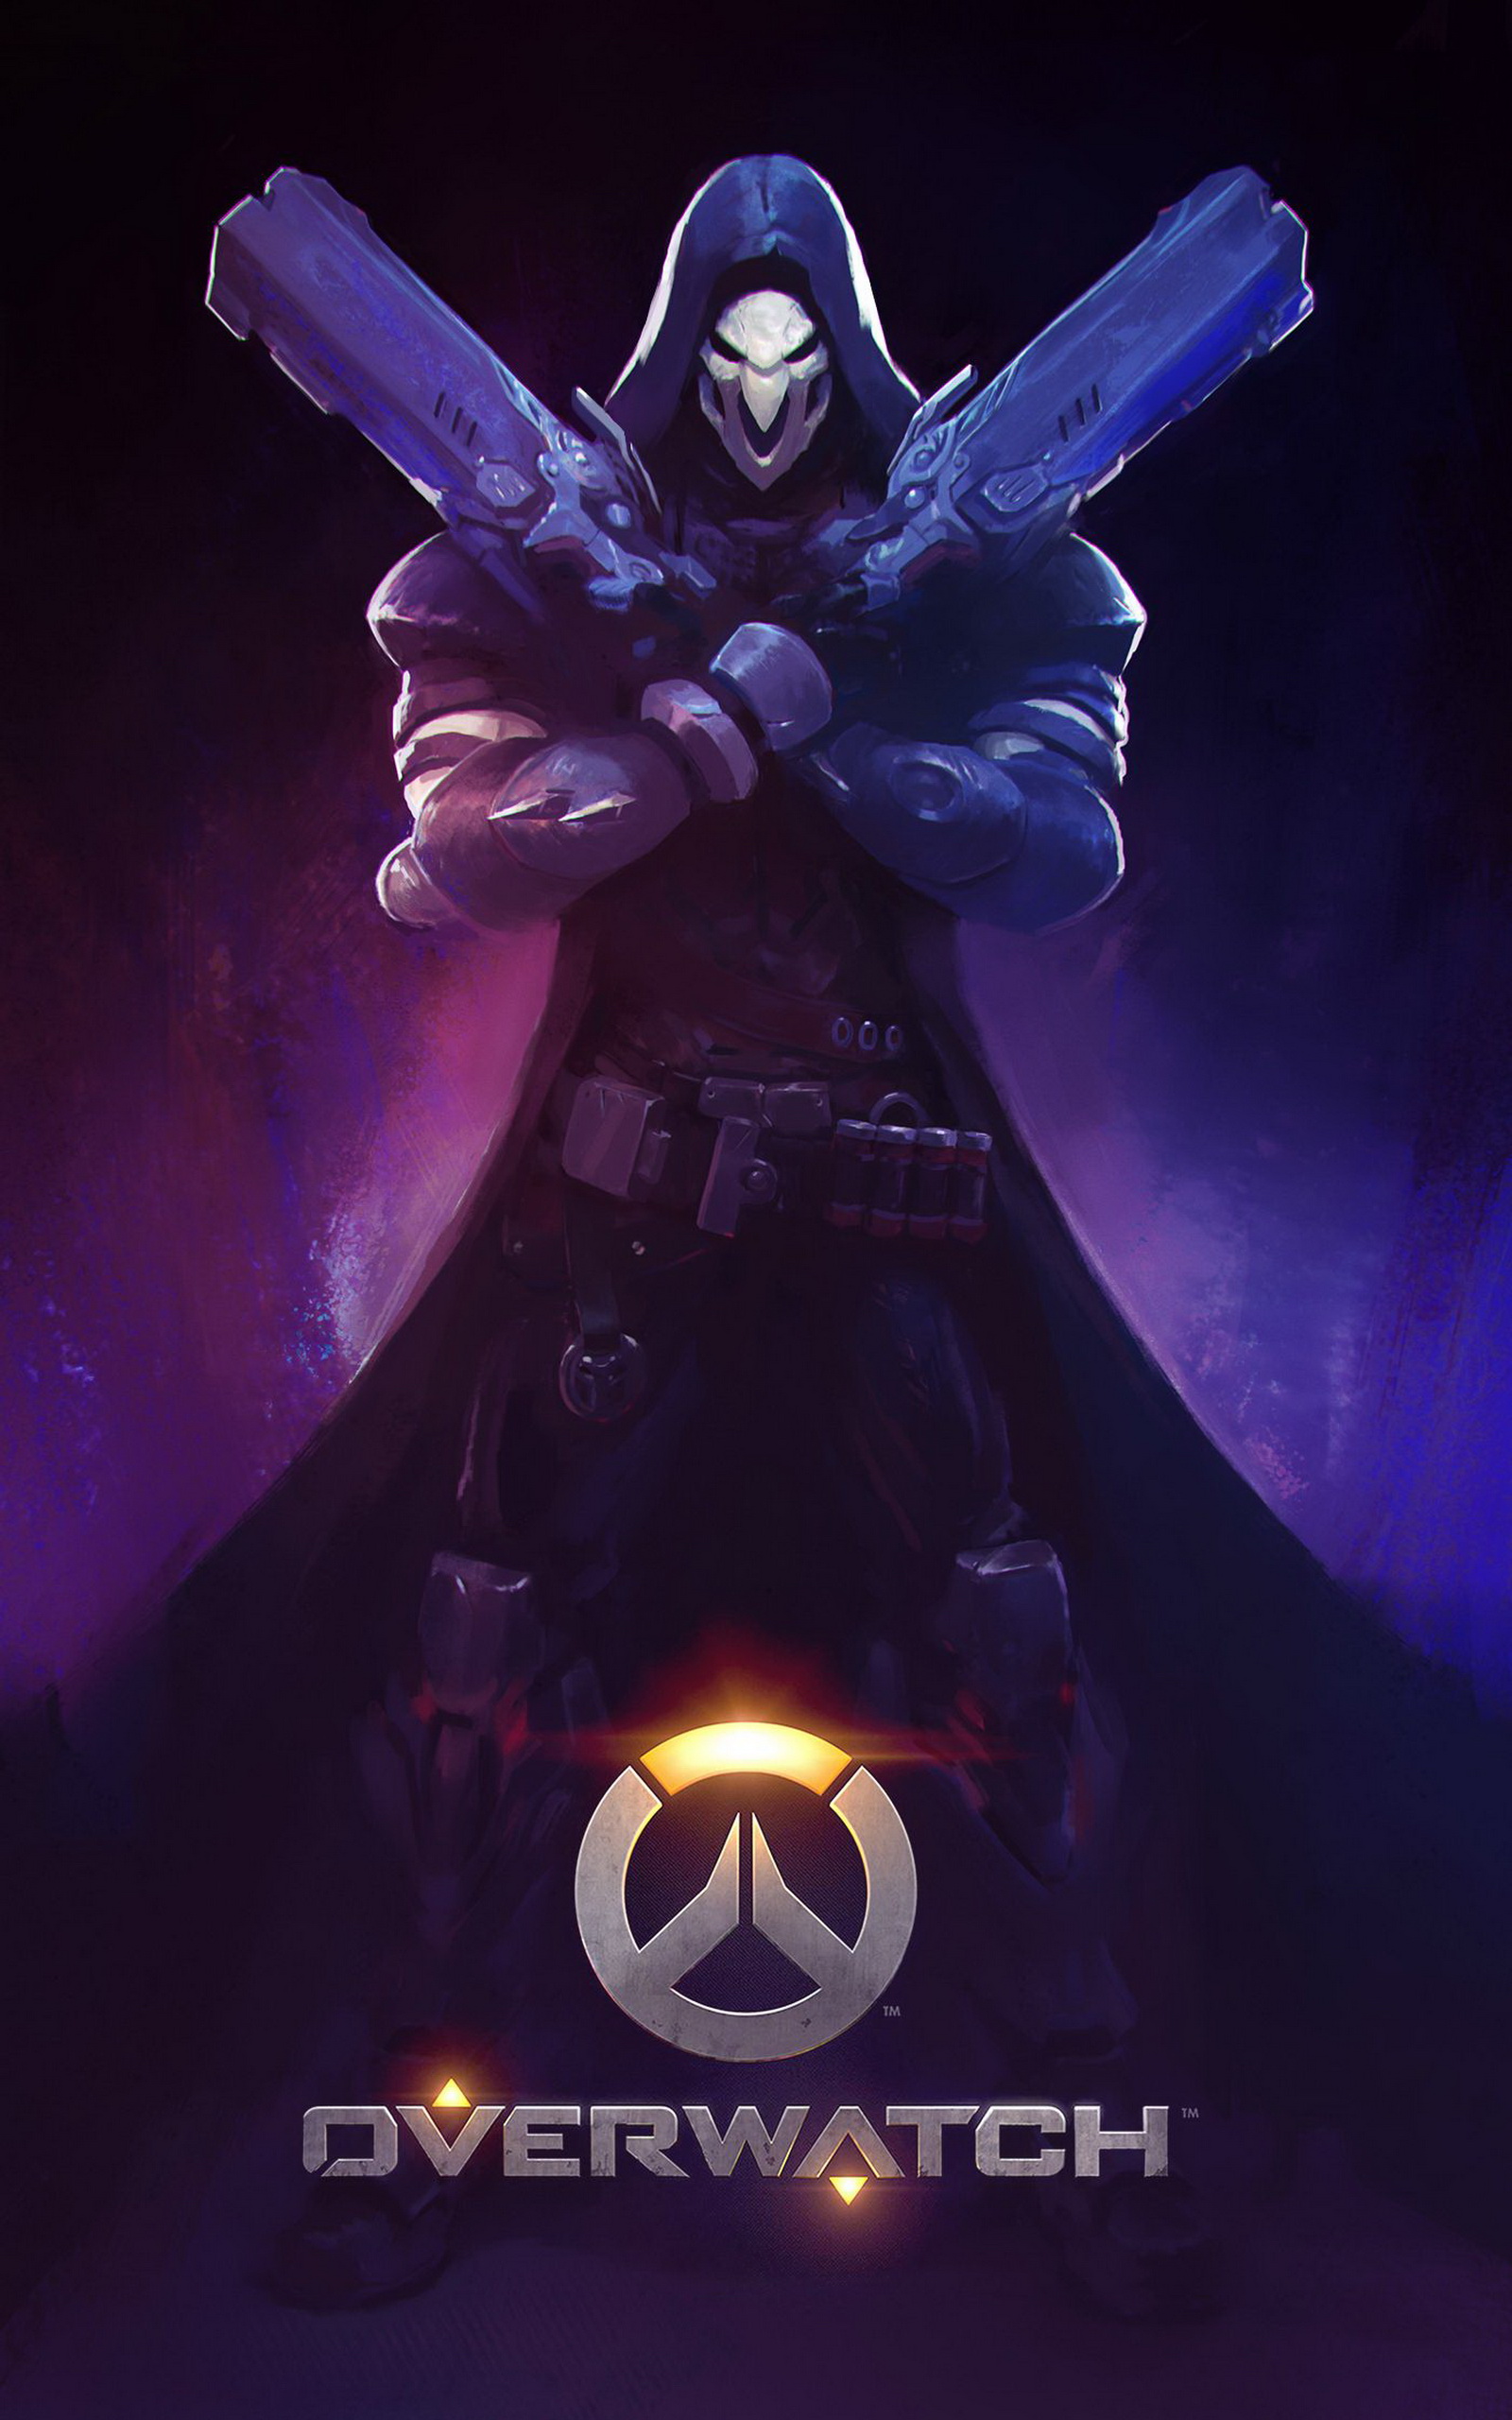 Overwatch Wallpapers High Quality | Download Free